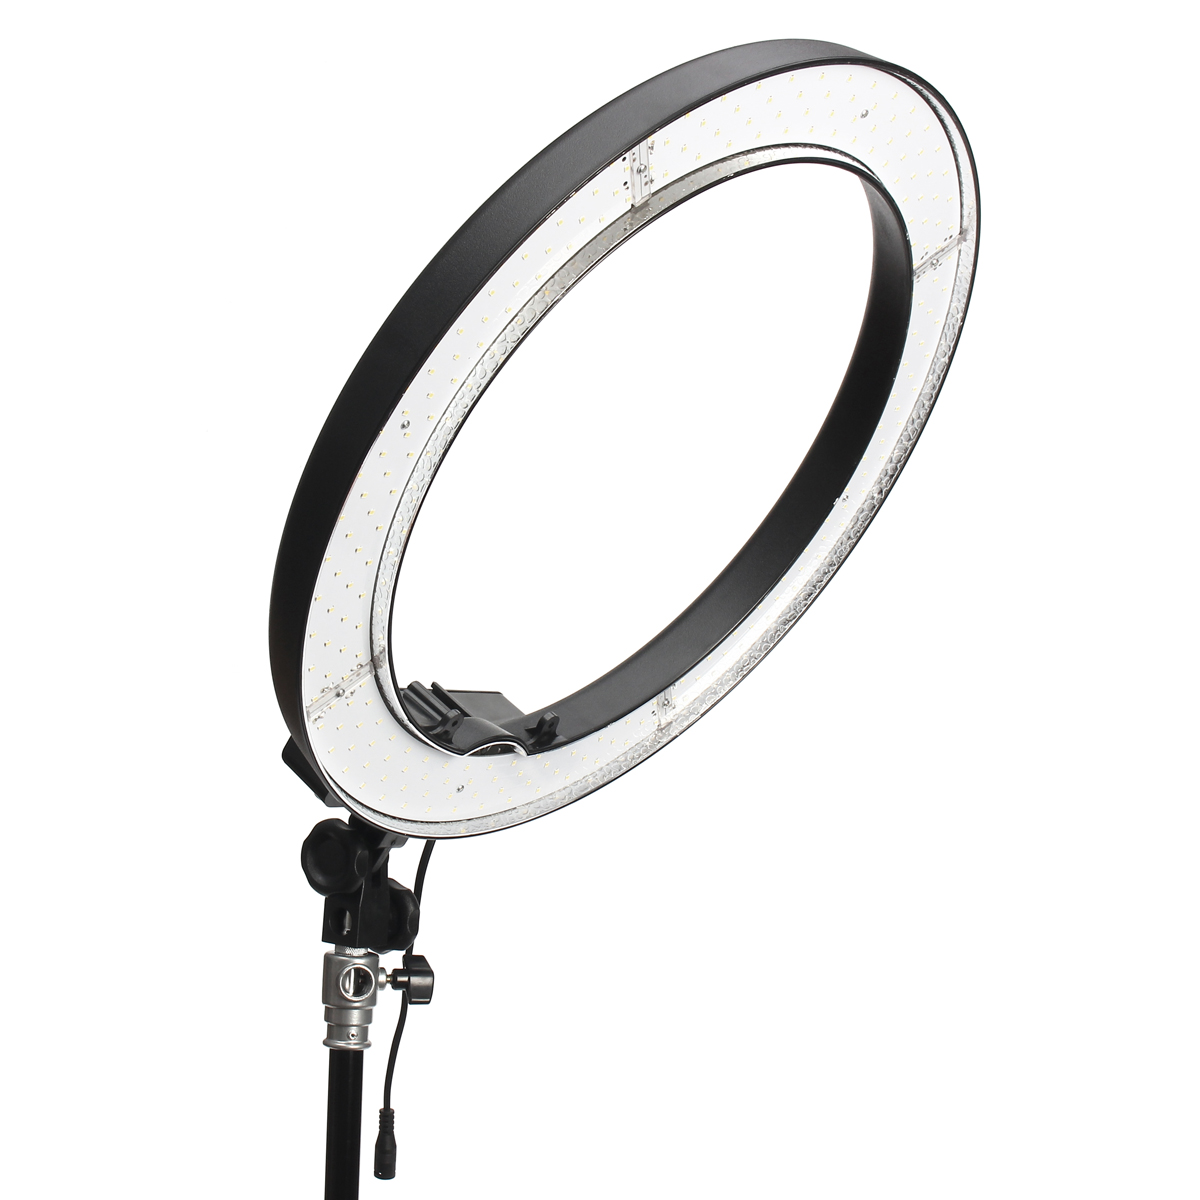 14-Inch-Dimmable-5500K-LED-Ring-Video-Light-With-Diffuser-Light-Stand-Tripod-1639178-1